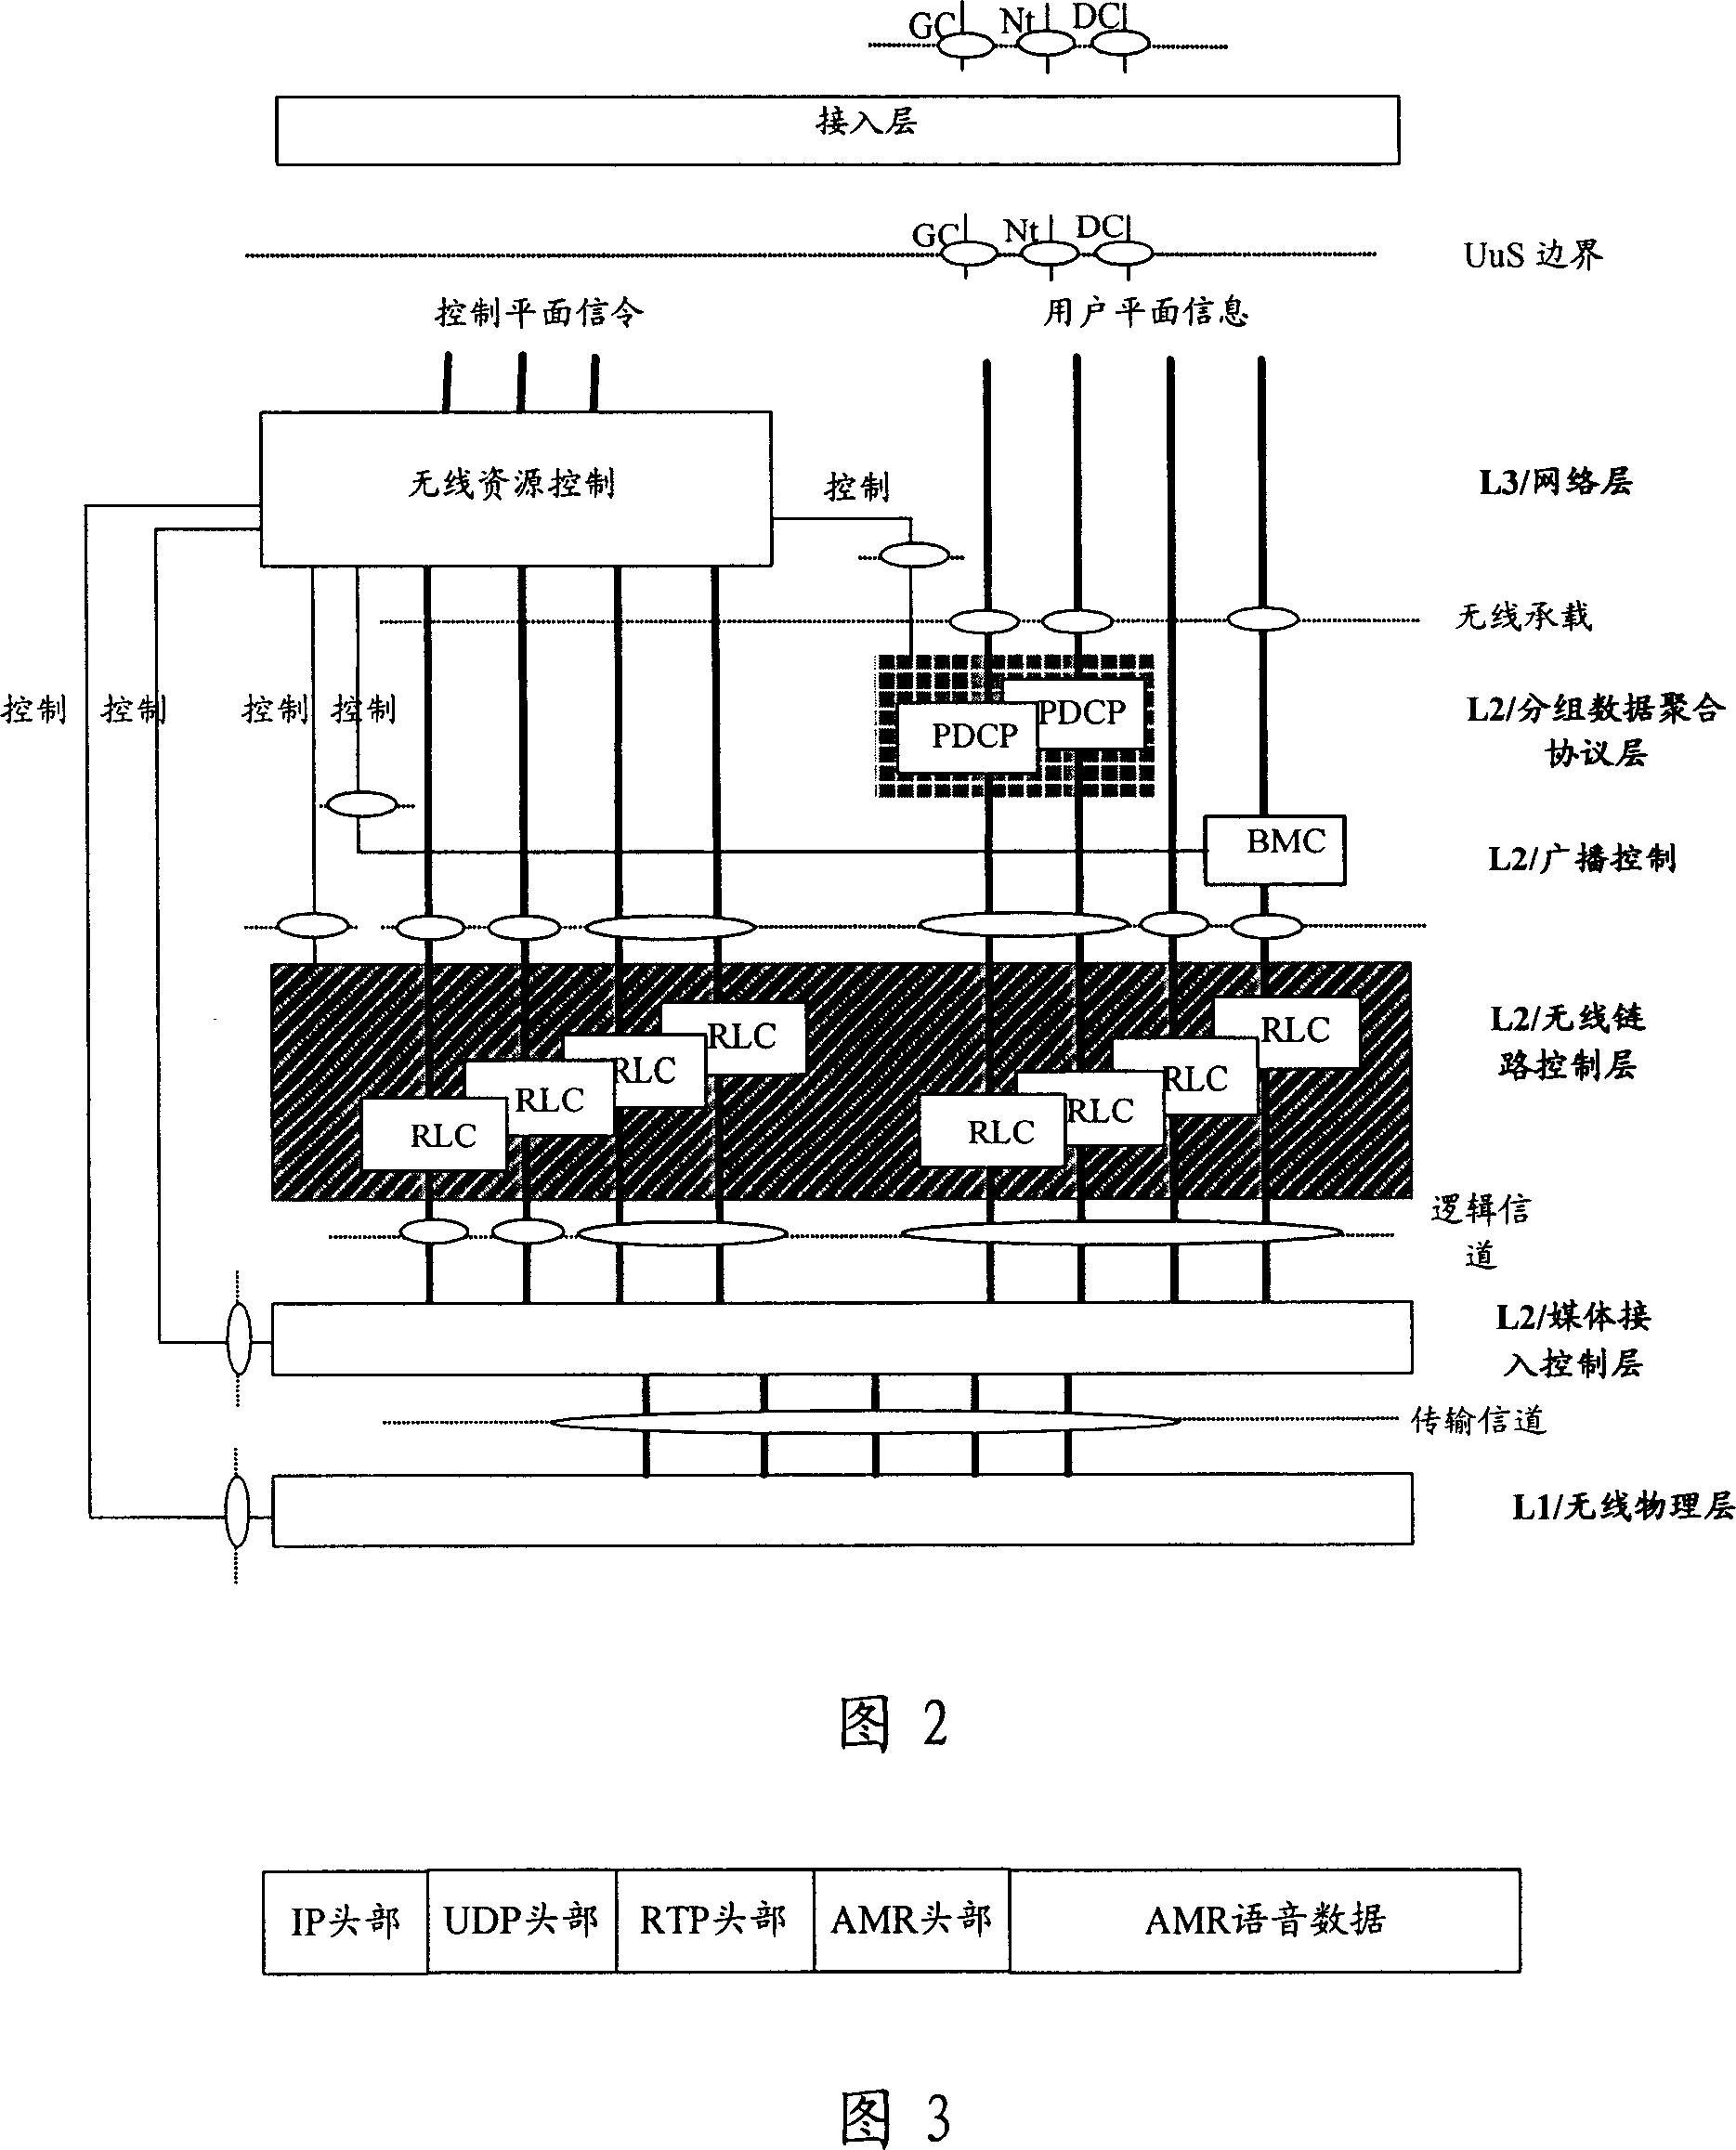 A method for loading and transferring packet voice